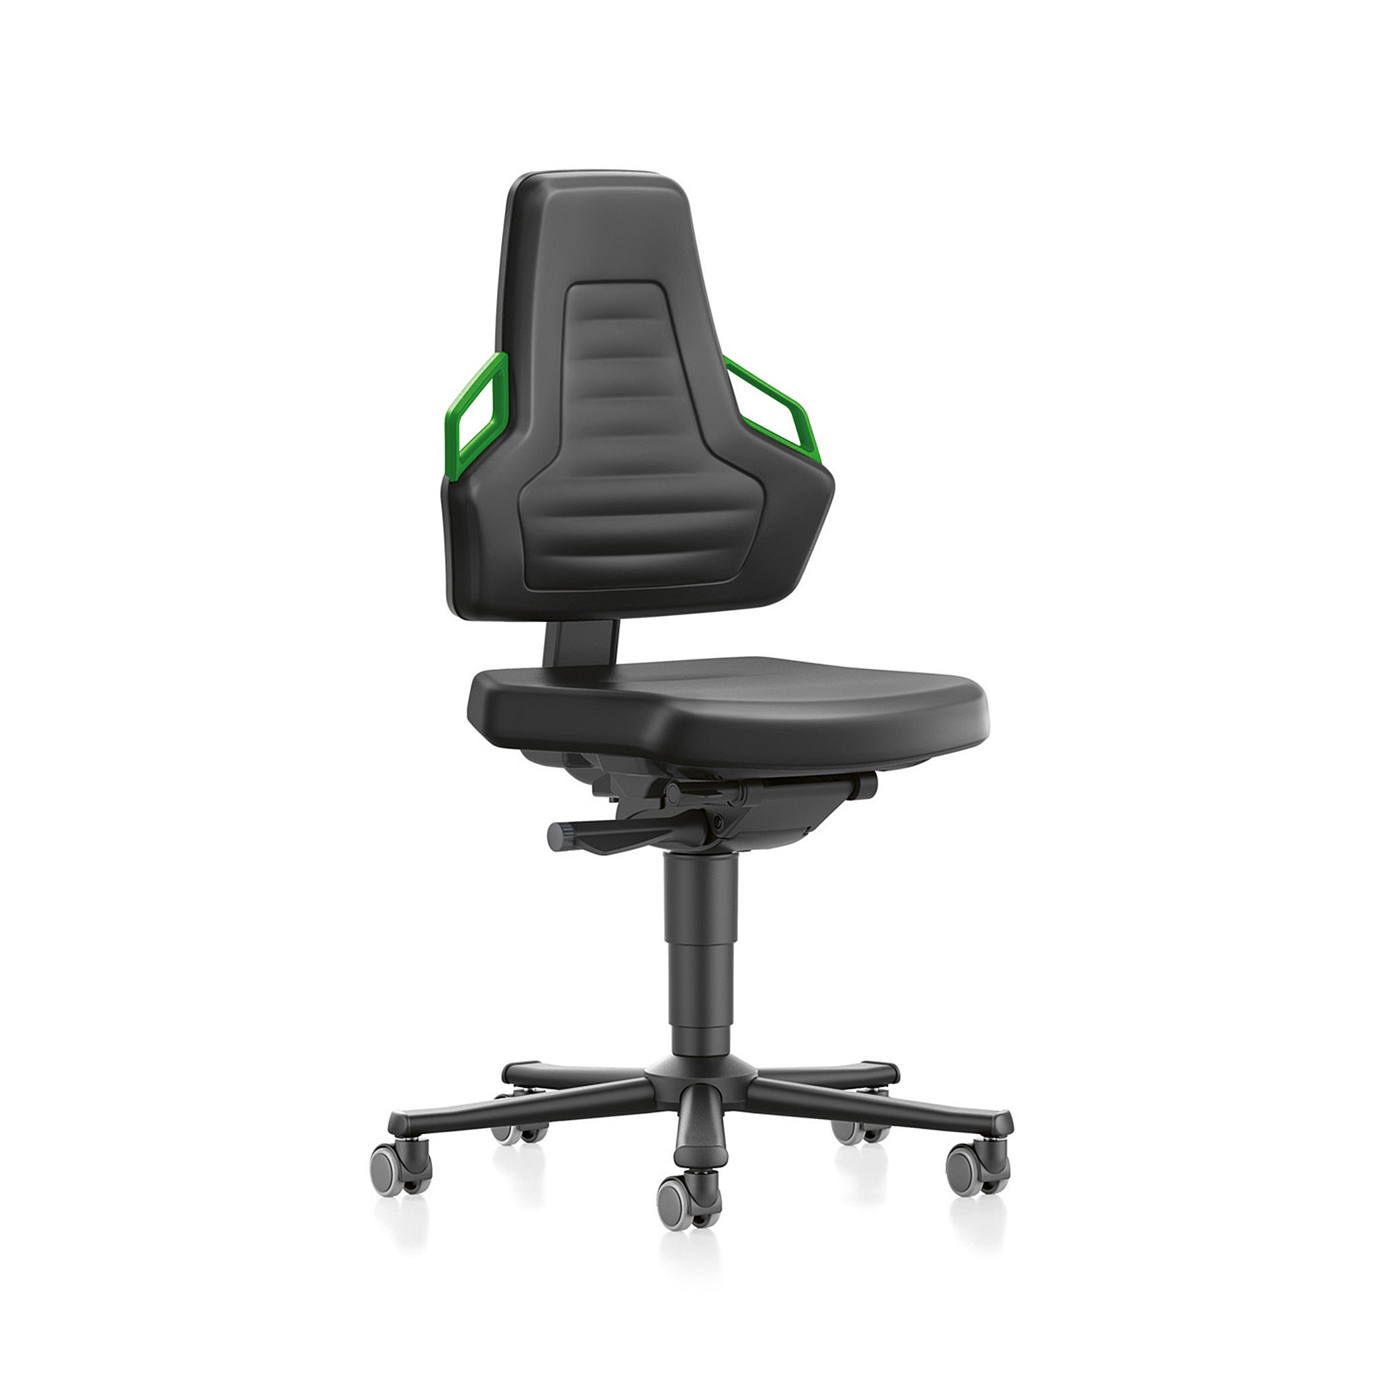 Nexxit Swivel Chair, Artificial leather Black/Green - 1 piece